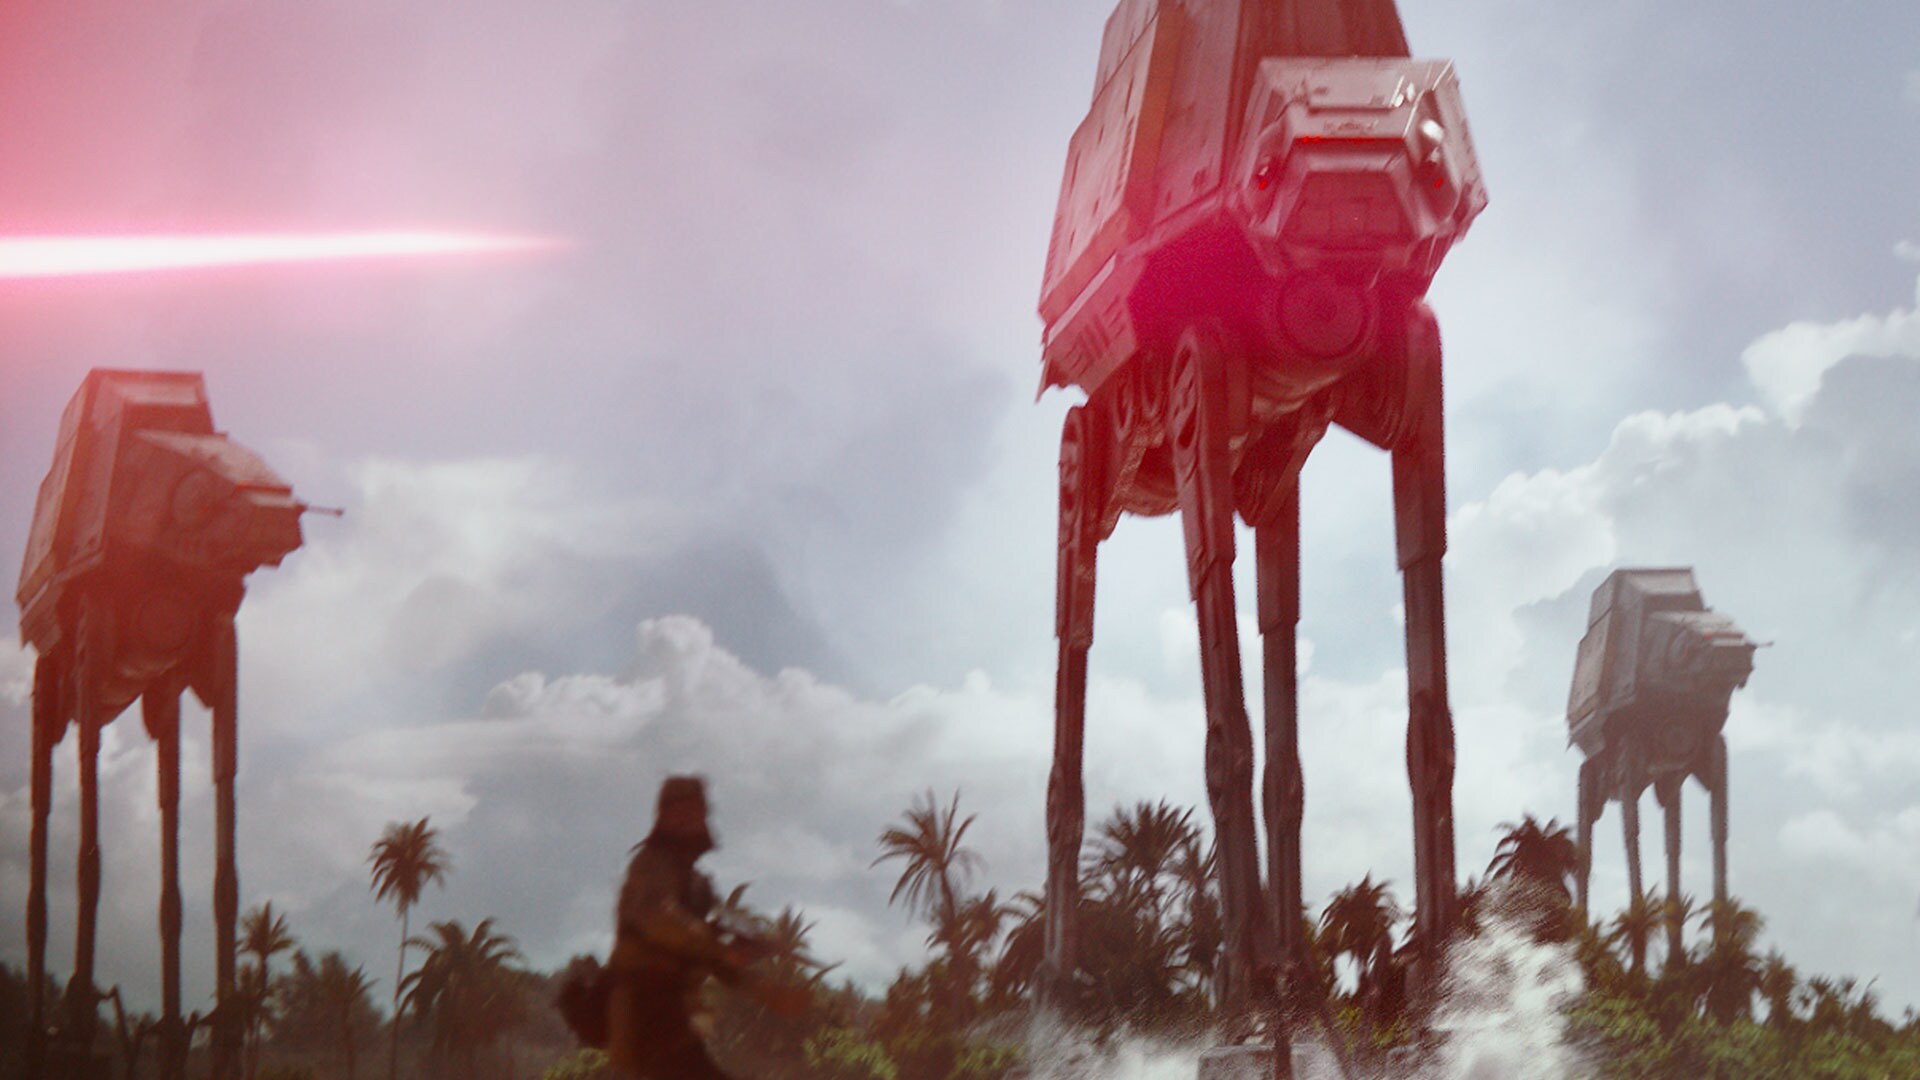 Rogue One: A Star Wars Story for ios instal